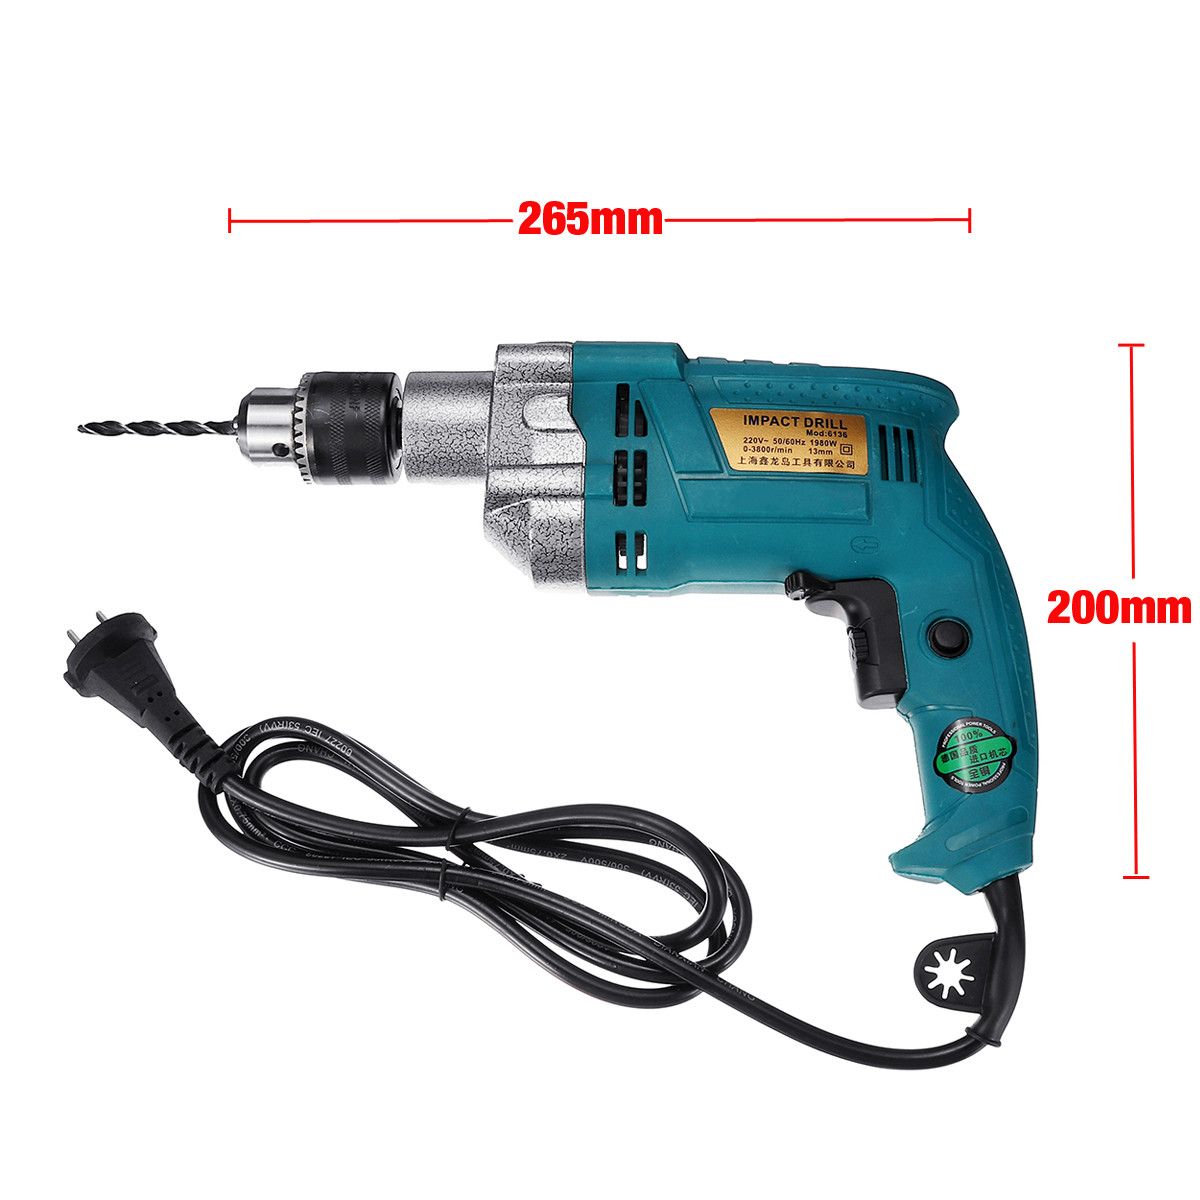 32Pcs-Set-1980W-3800RPM-Electric-Impact-Drill-Screwdriver-Household-Electric-Flat-Drill-Grinding-1466059